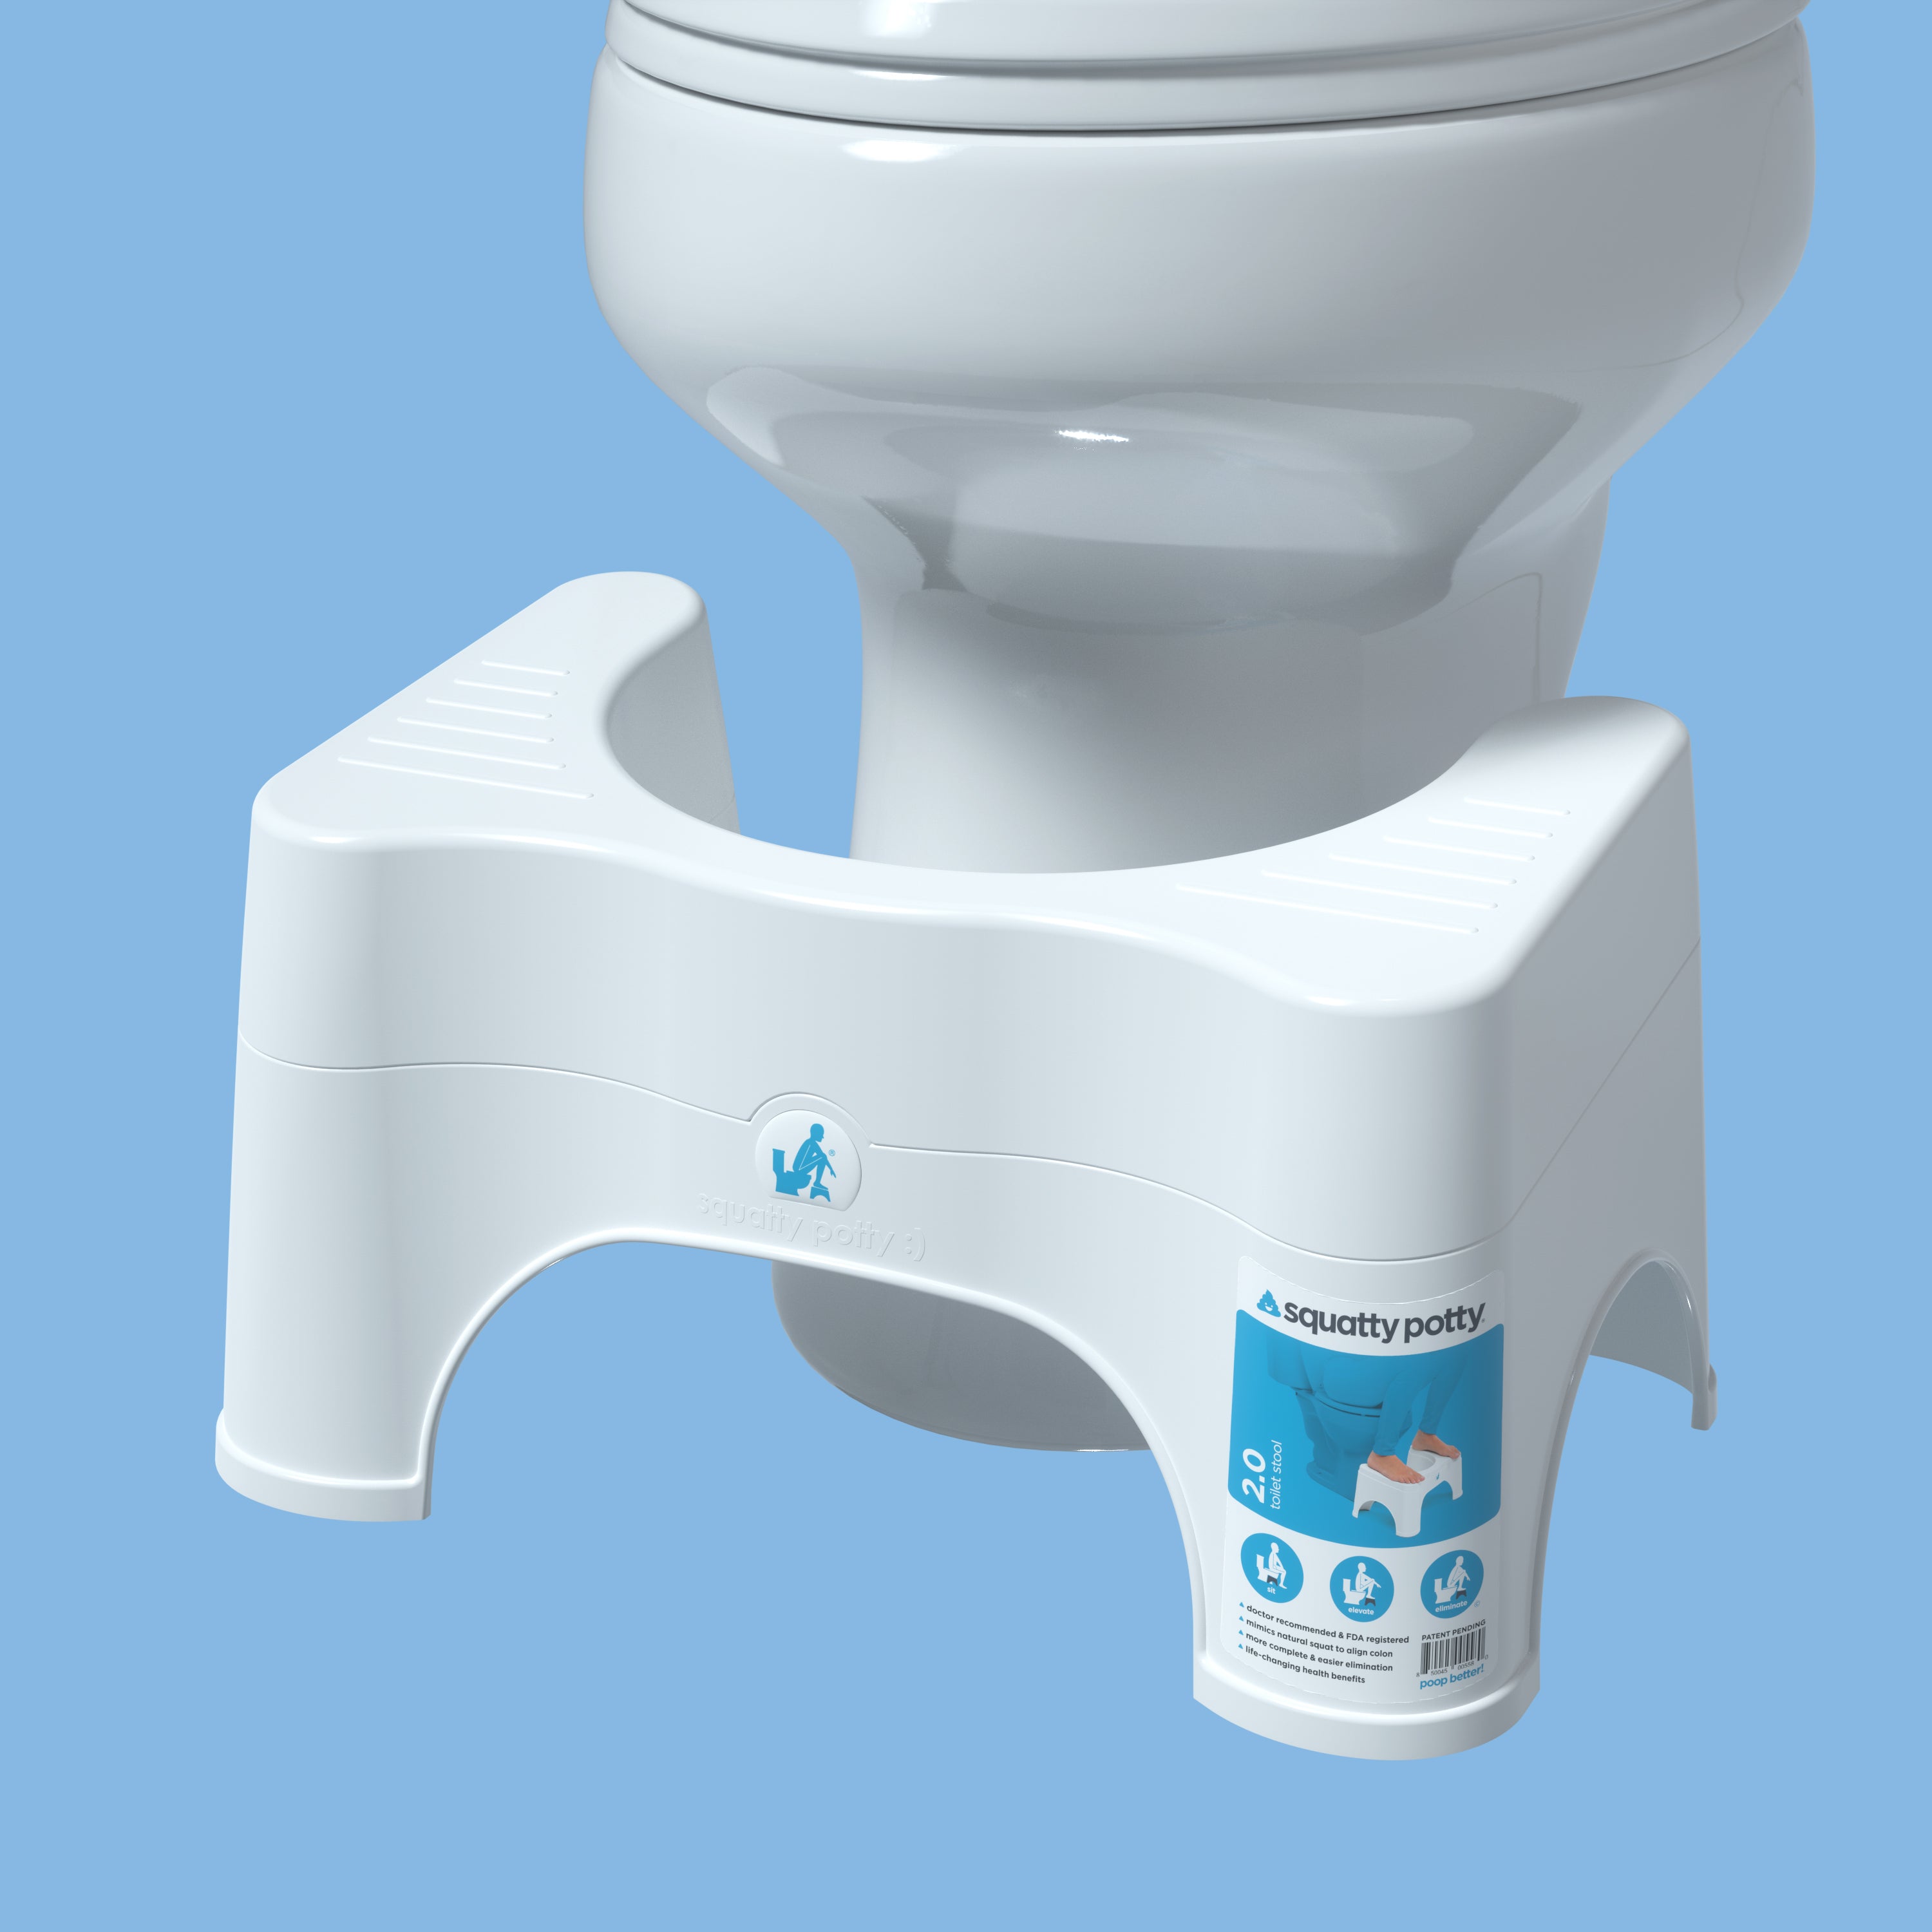 Squatty Potty 9 ecco stool Potty Seat - plastic Potty Seat available at  reasonable price - Buy Baby Care Products in India